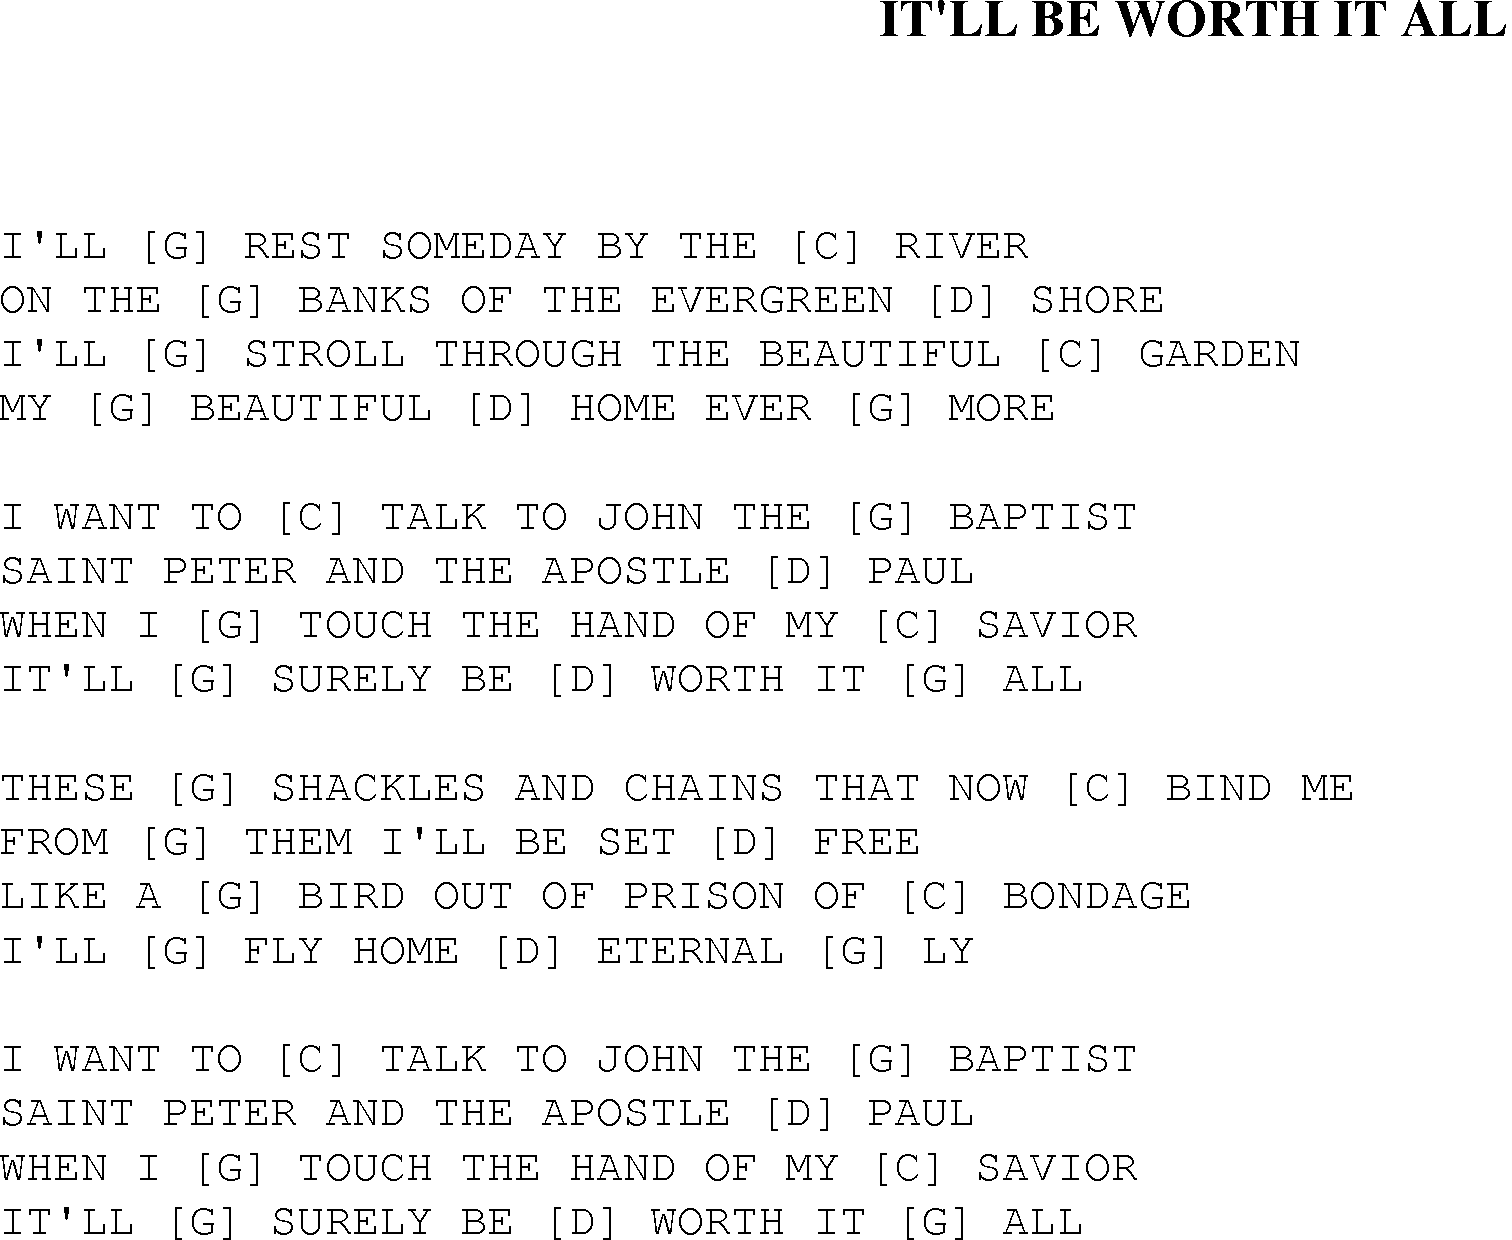 Gospel Song: itll_be_worth_it_all, lyrics and chords.